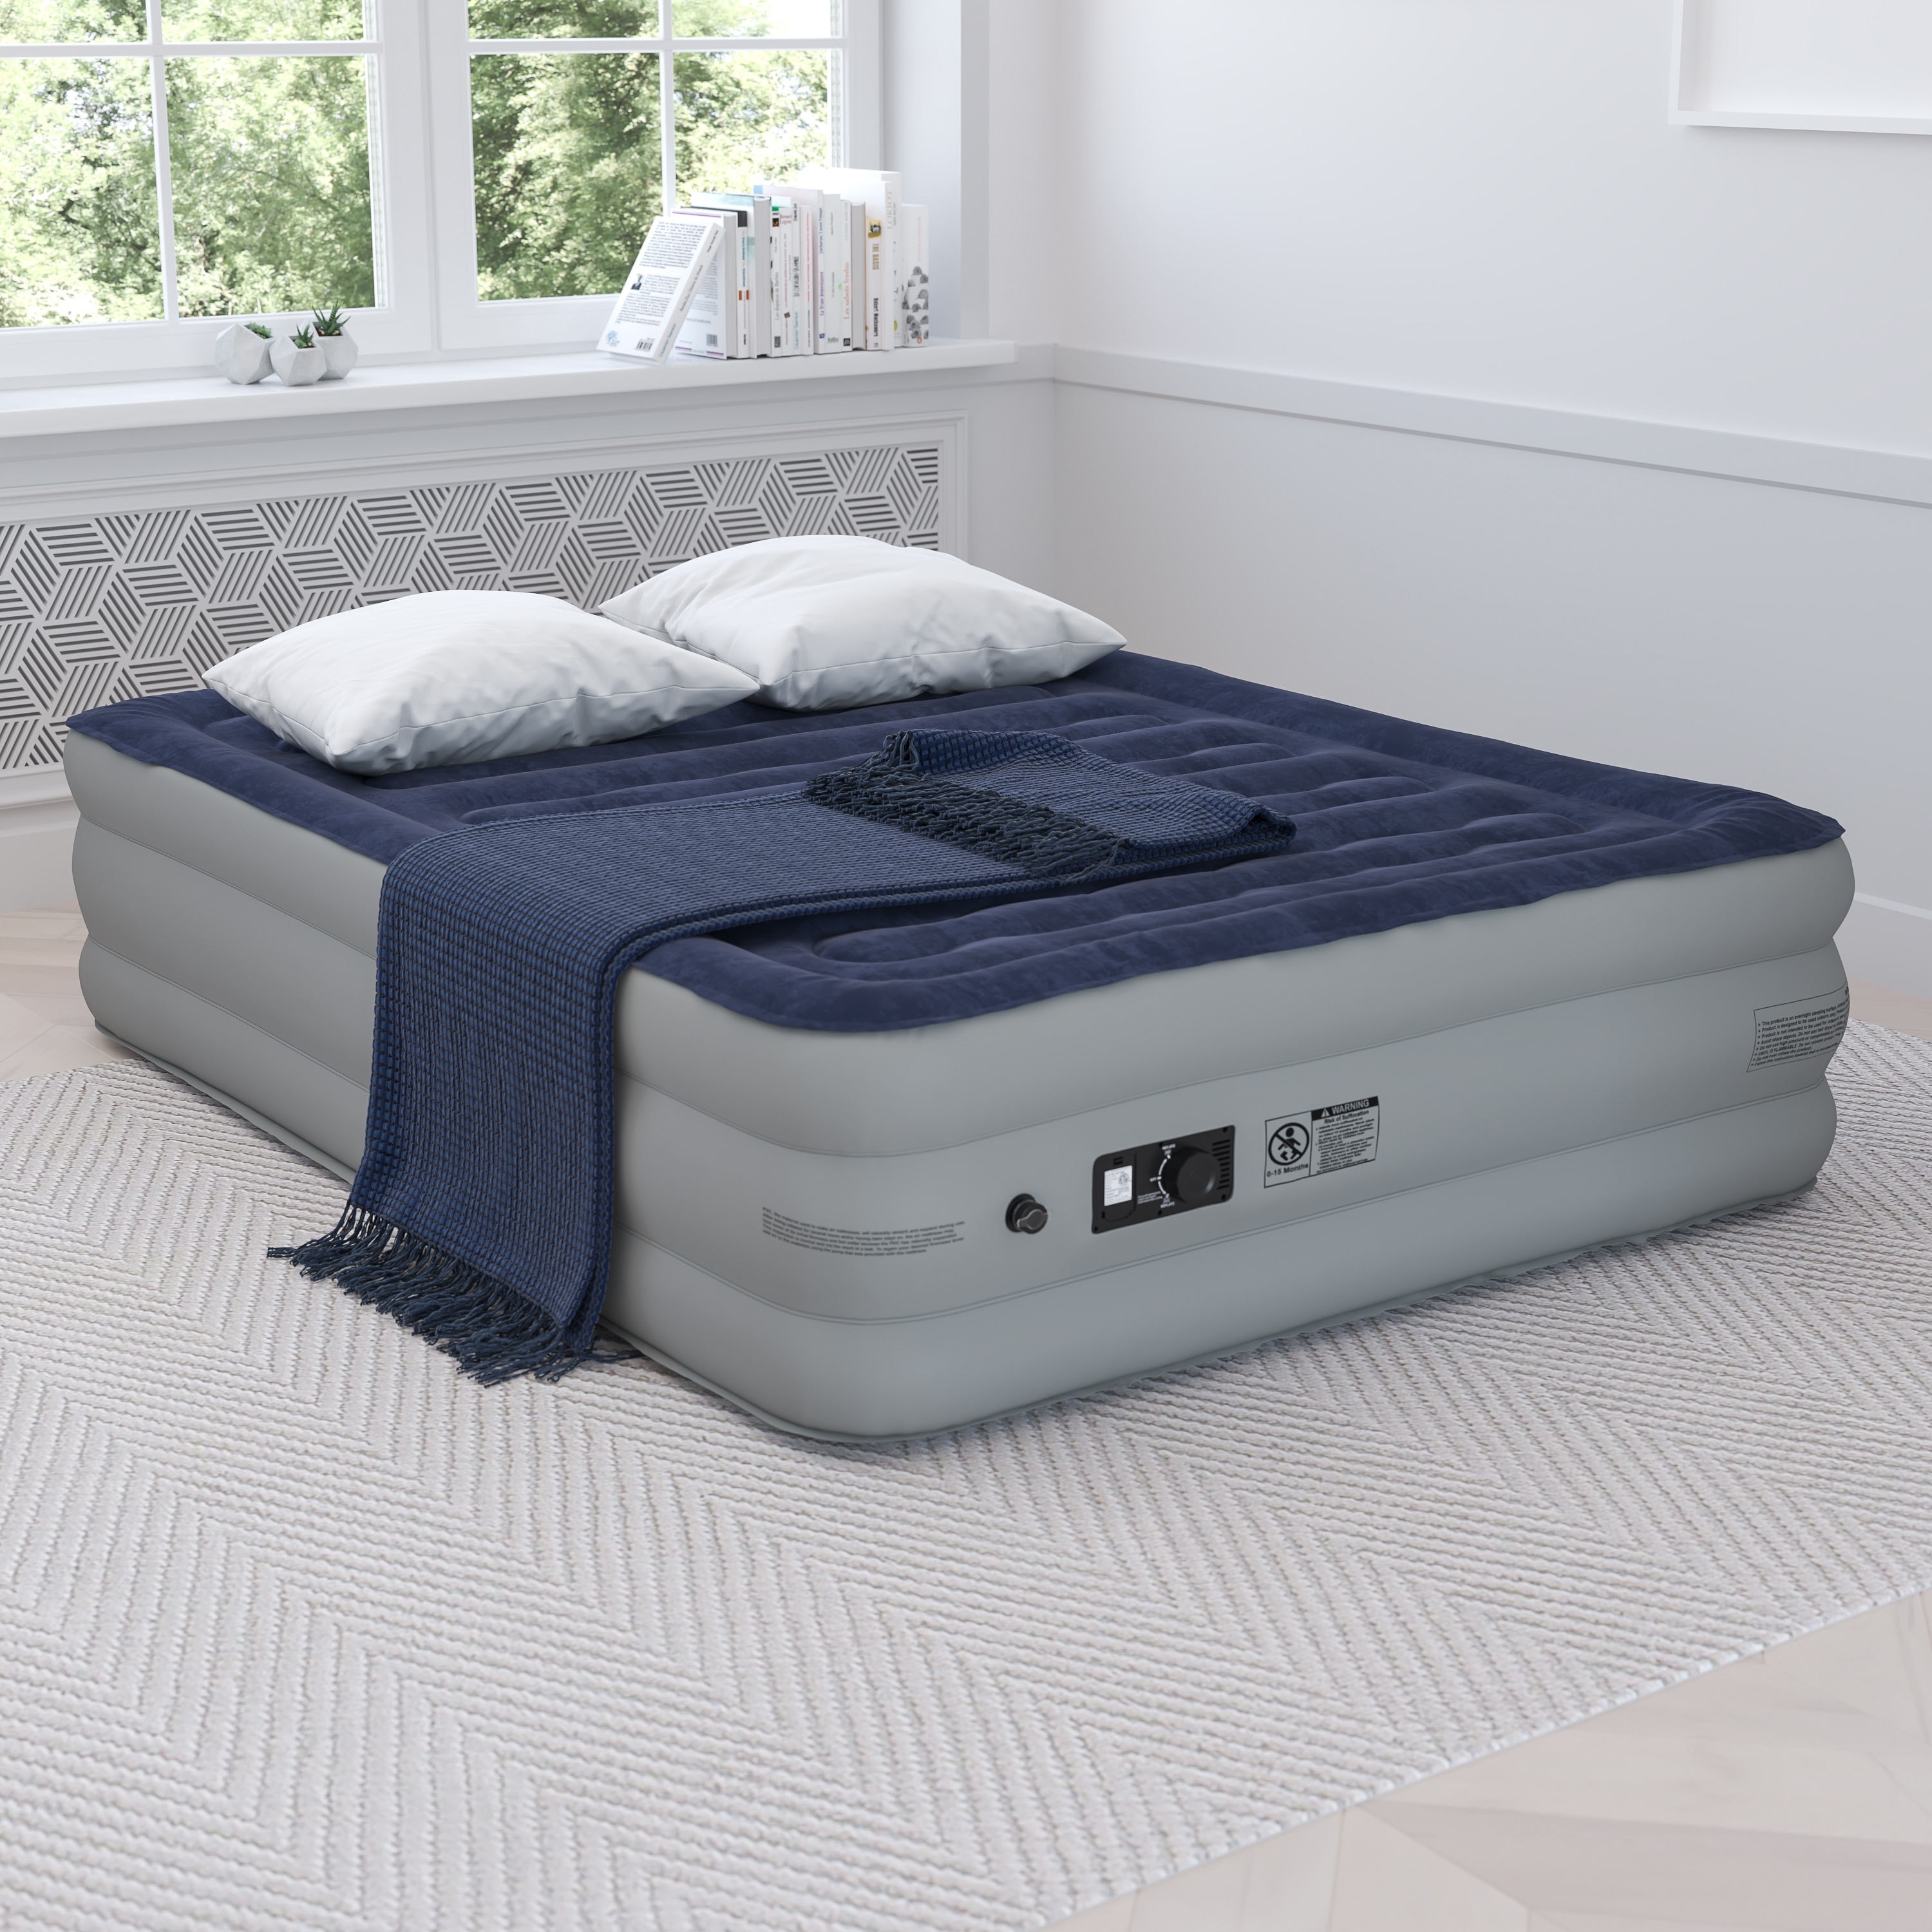 https://ak1.ostkcdn.com/images/products/is/images/direct/6db69ef2affda62cf4b4be7d7476147cd078c4d7/18%22-Air-Mattress---ETL-Certified-Internal-Electric-Pump-and-Carrying-Case.jpg